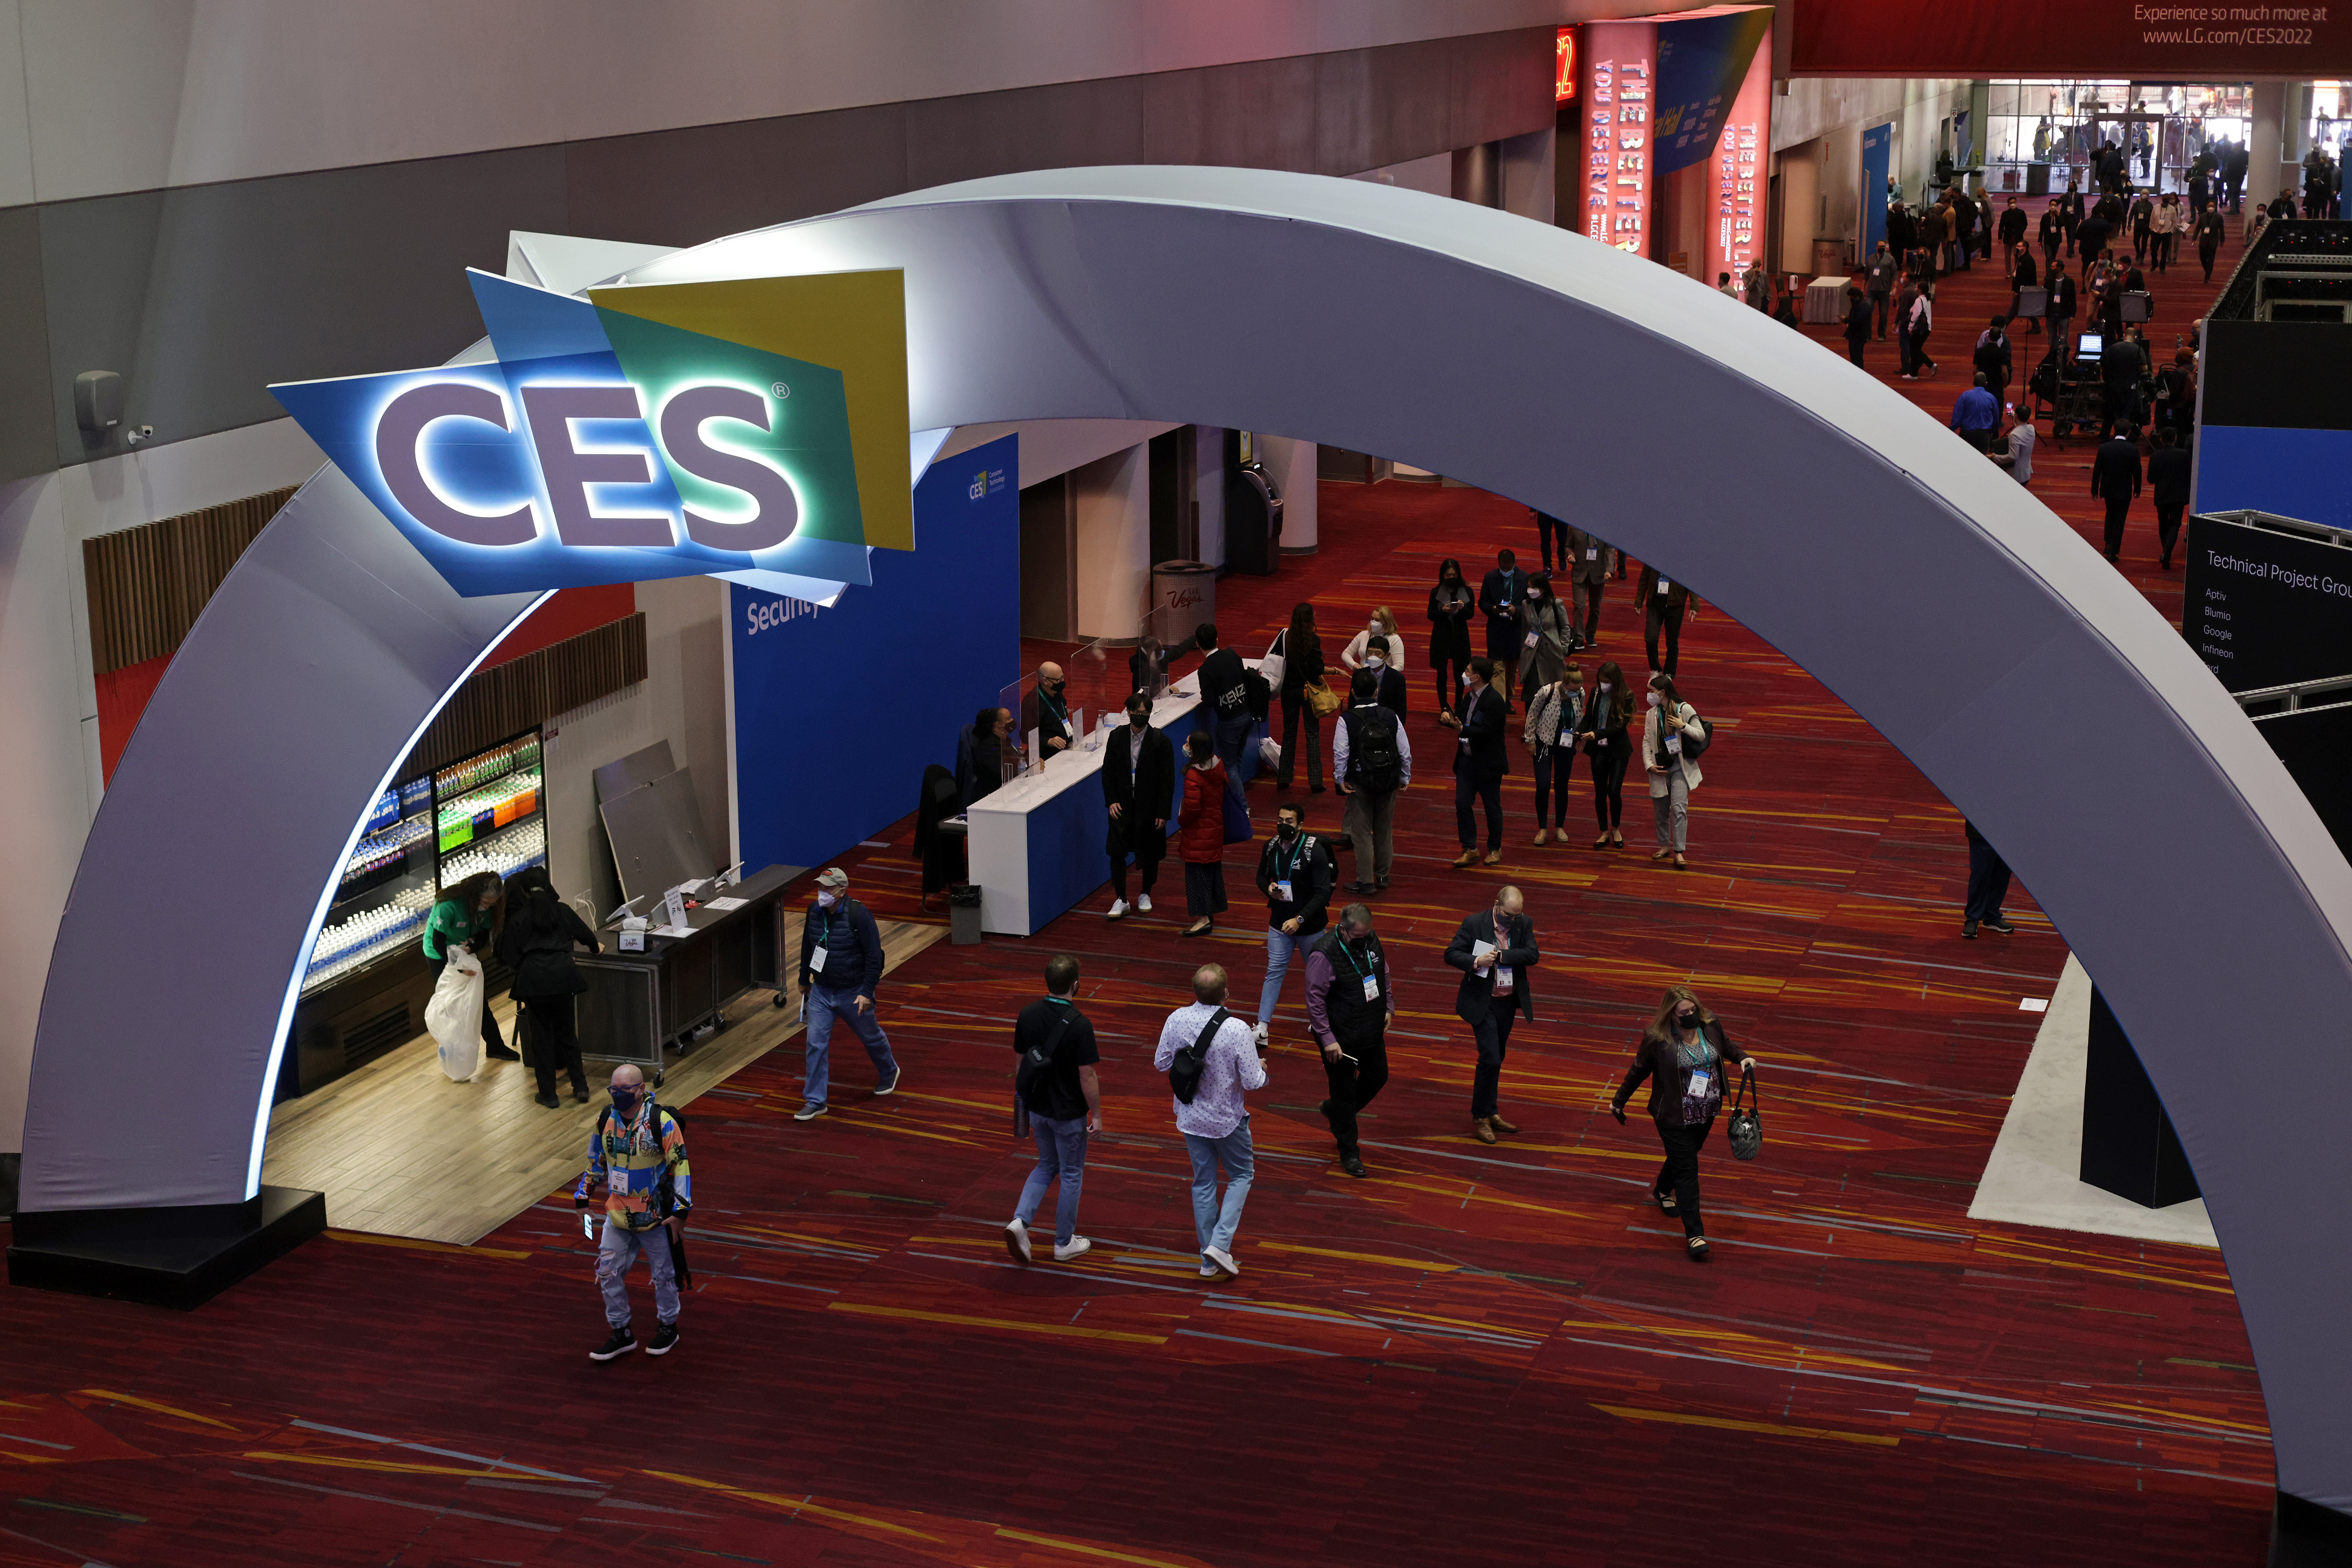 LAS VEGAS, NEVADA - JANUARY 5: Attendees walk through the corridors of the Las Vegas Convention Center during Day 1 of CES 2022 on January 5, 2022 in Las Vegas, Nevada.  CES, the world's largest annual consumer technology trade show, will be held in person until Jan. 7, and some companies have decided to attend virtually or cancel their attendance amid fears of a spike in COVID-19 cases.  (Photo by Alex Wong/Getty Images)